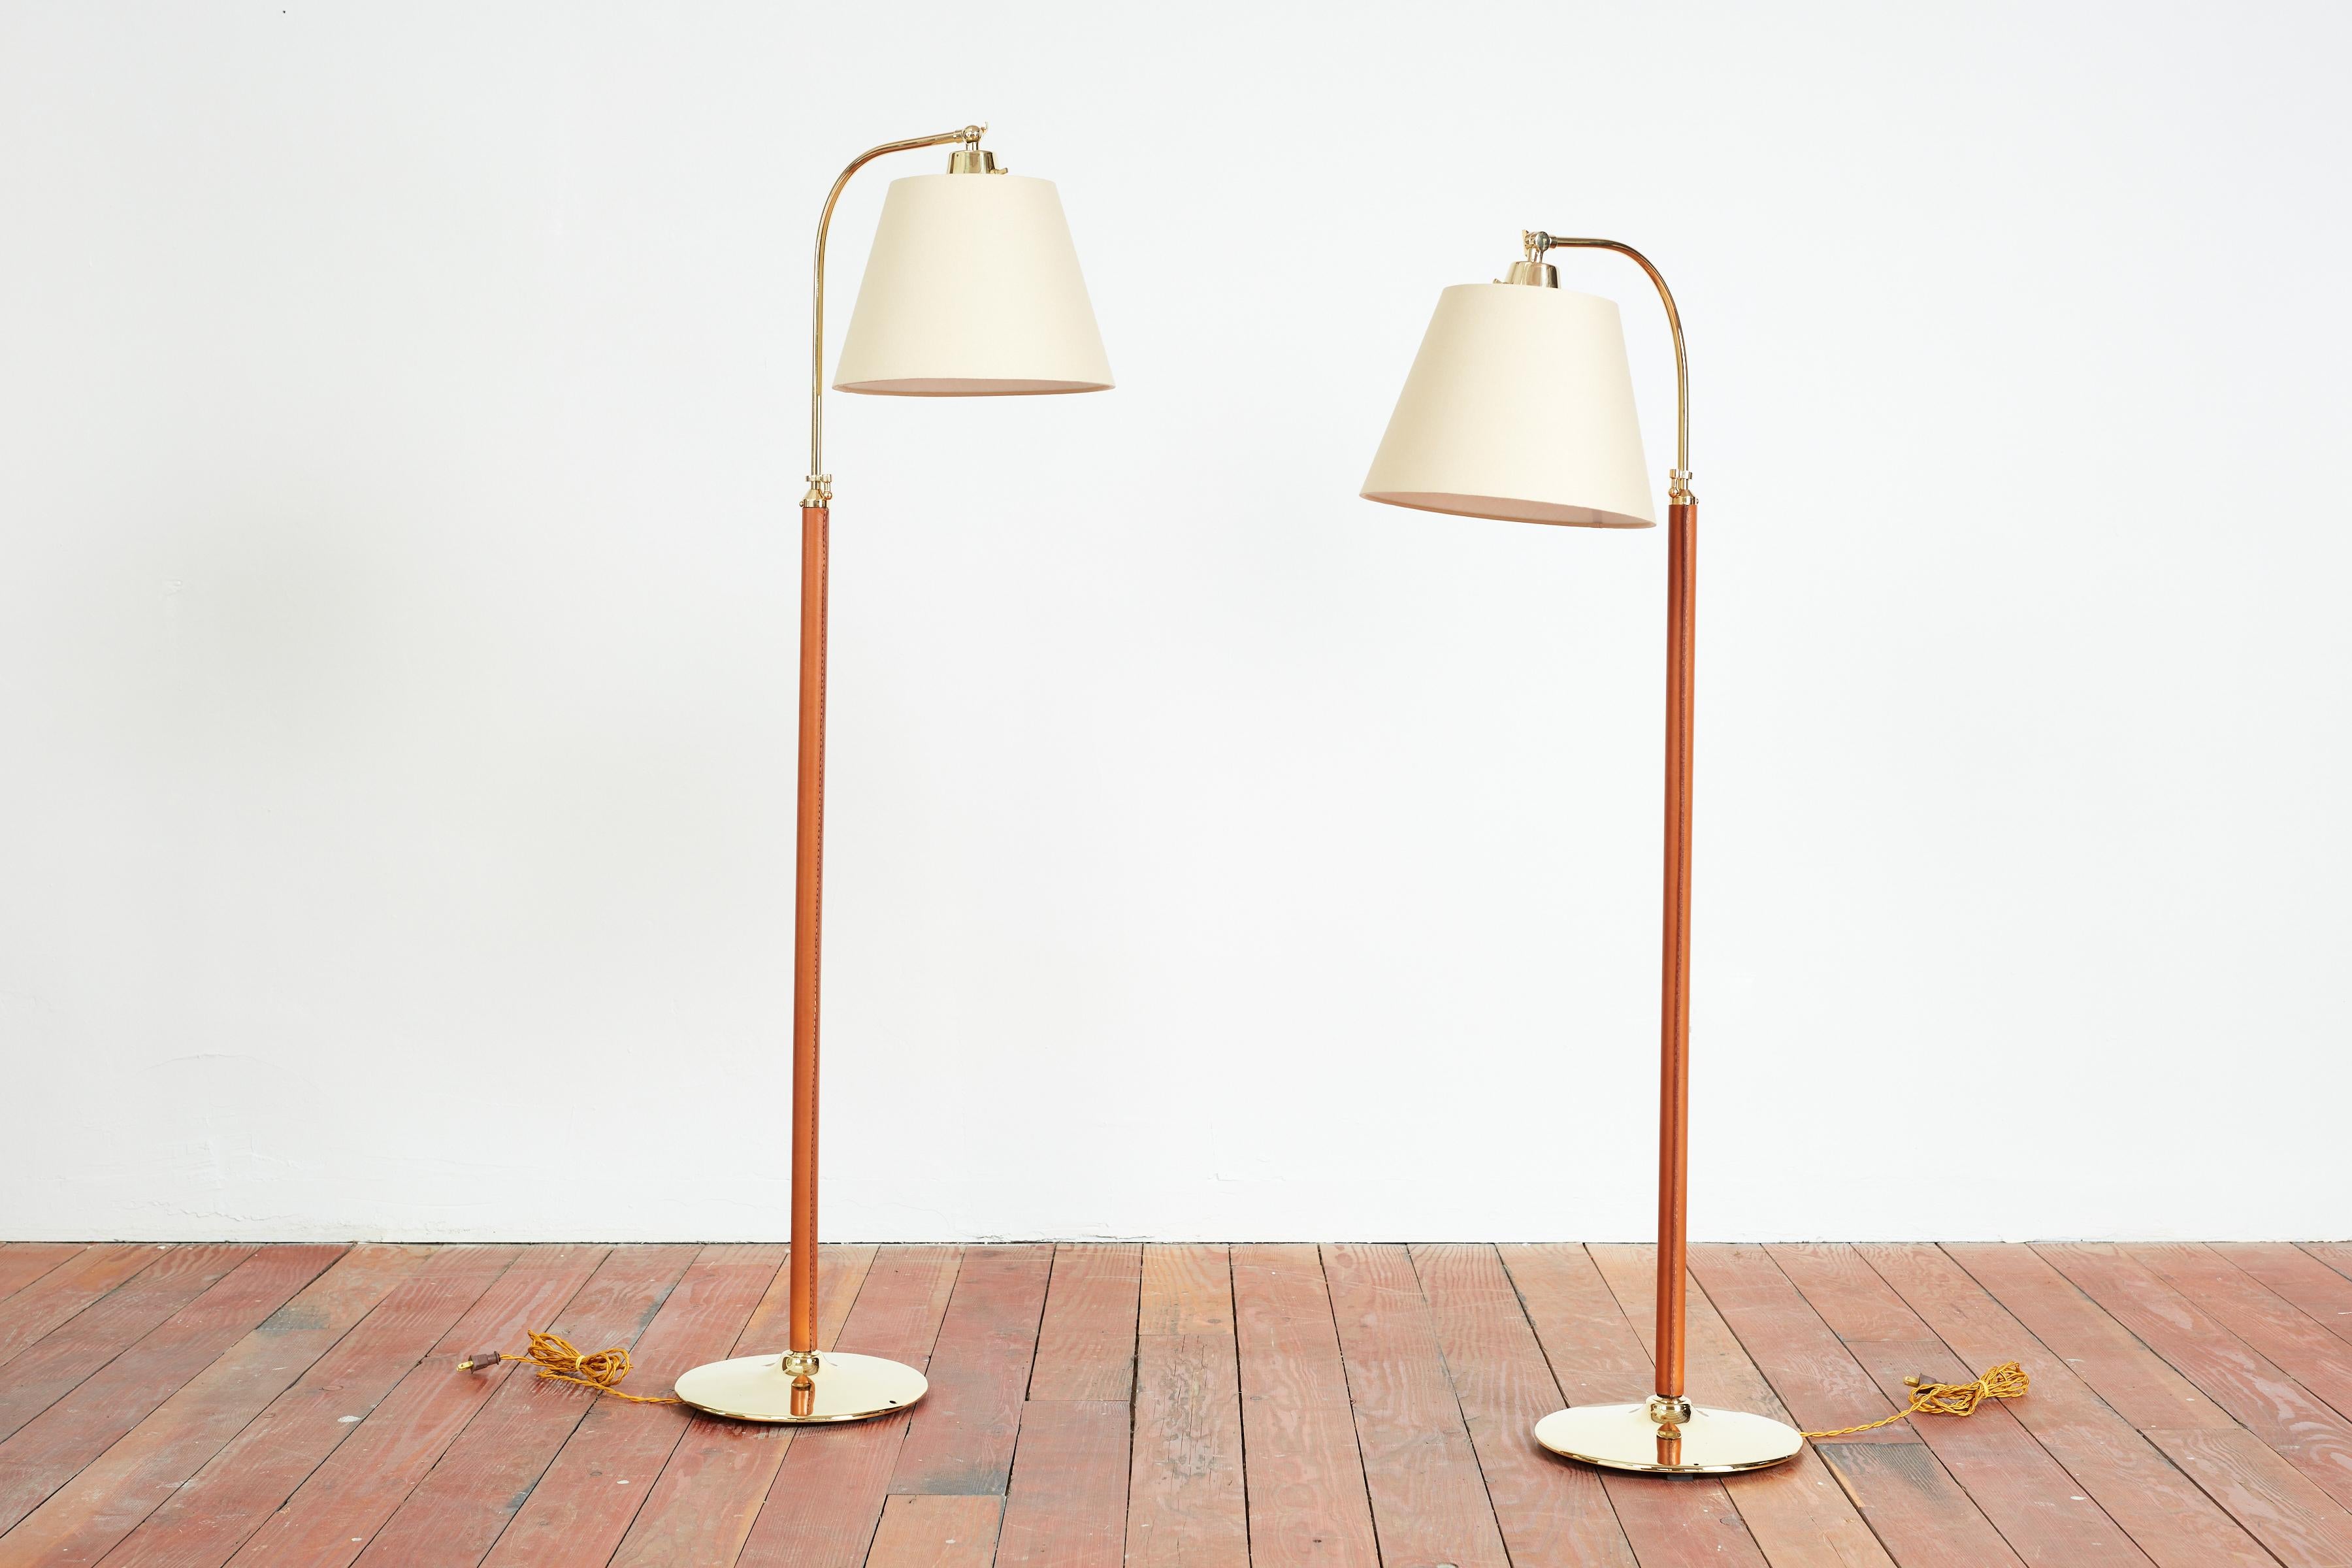 Matching pair (sold separately) of floor lamps attributed to Jacques Adnet
Caramel colored leather with polished brass round base and hardware.
Adjustable height mechanism
New linen shade

Lamp Height 50 1/2